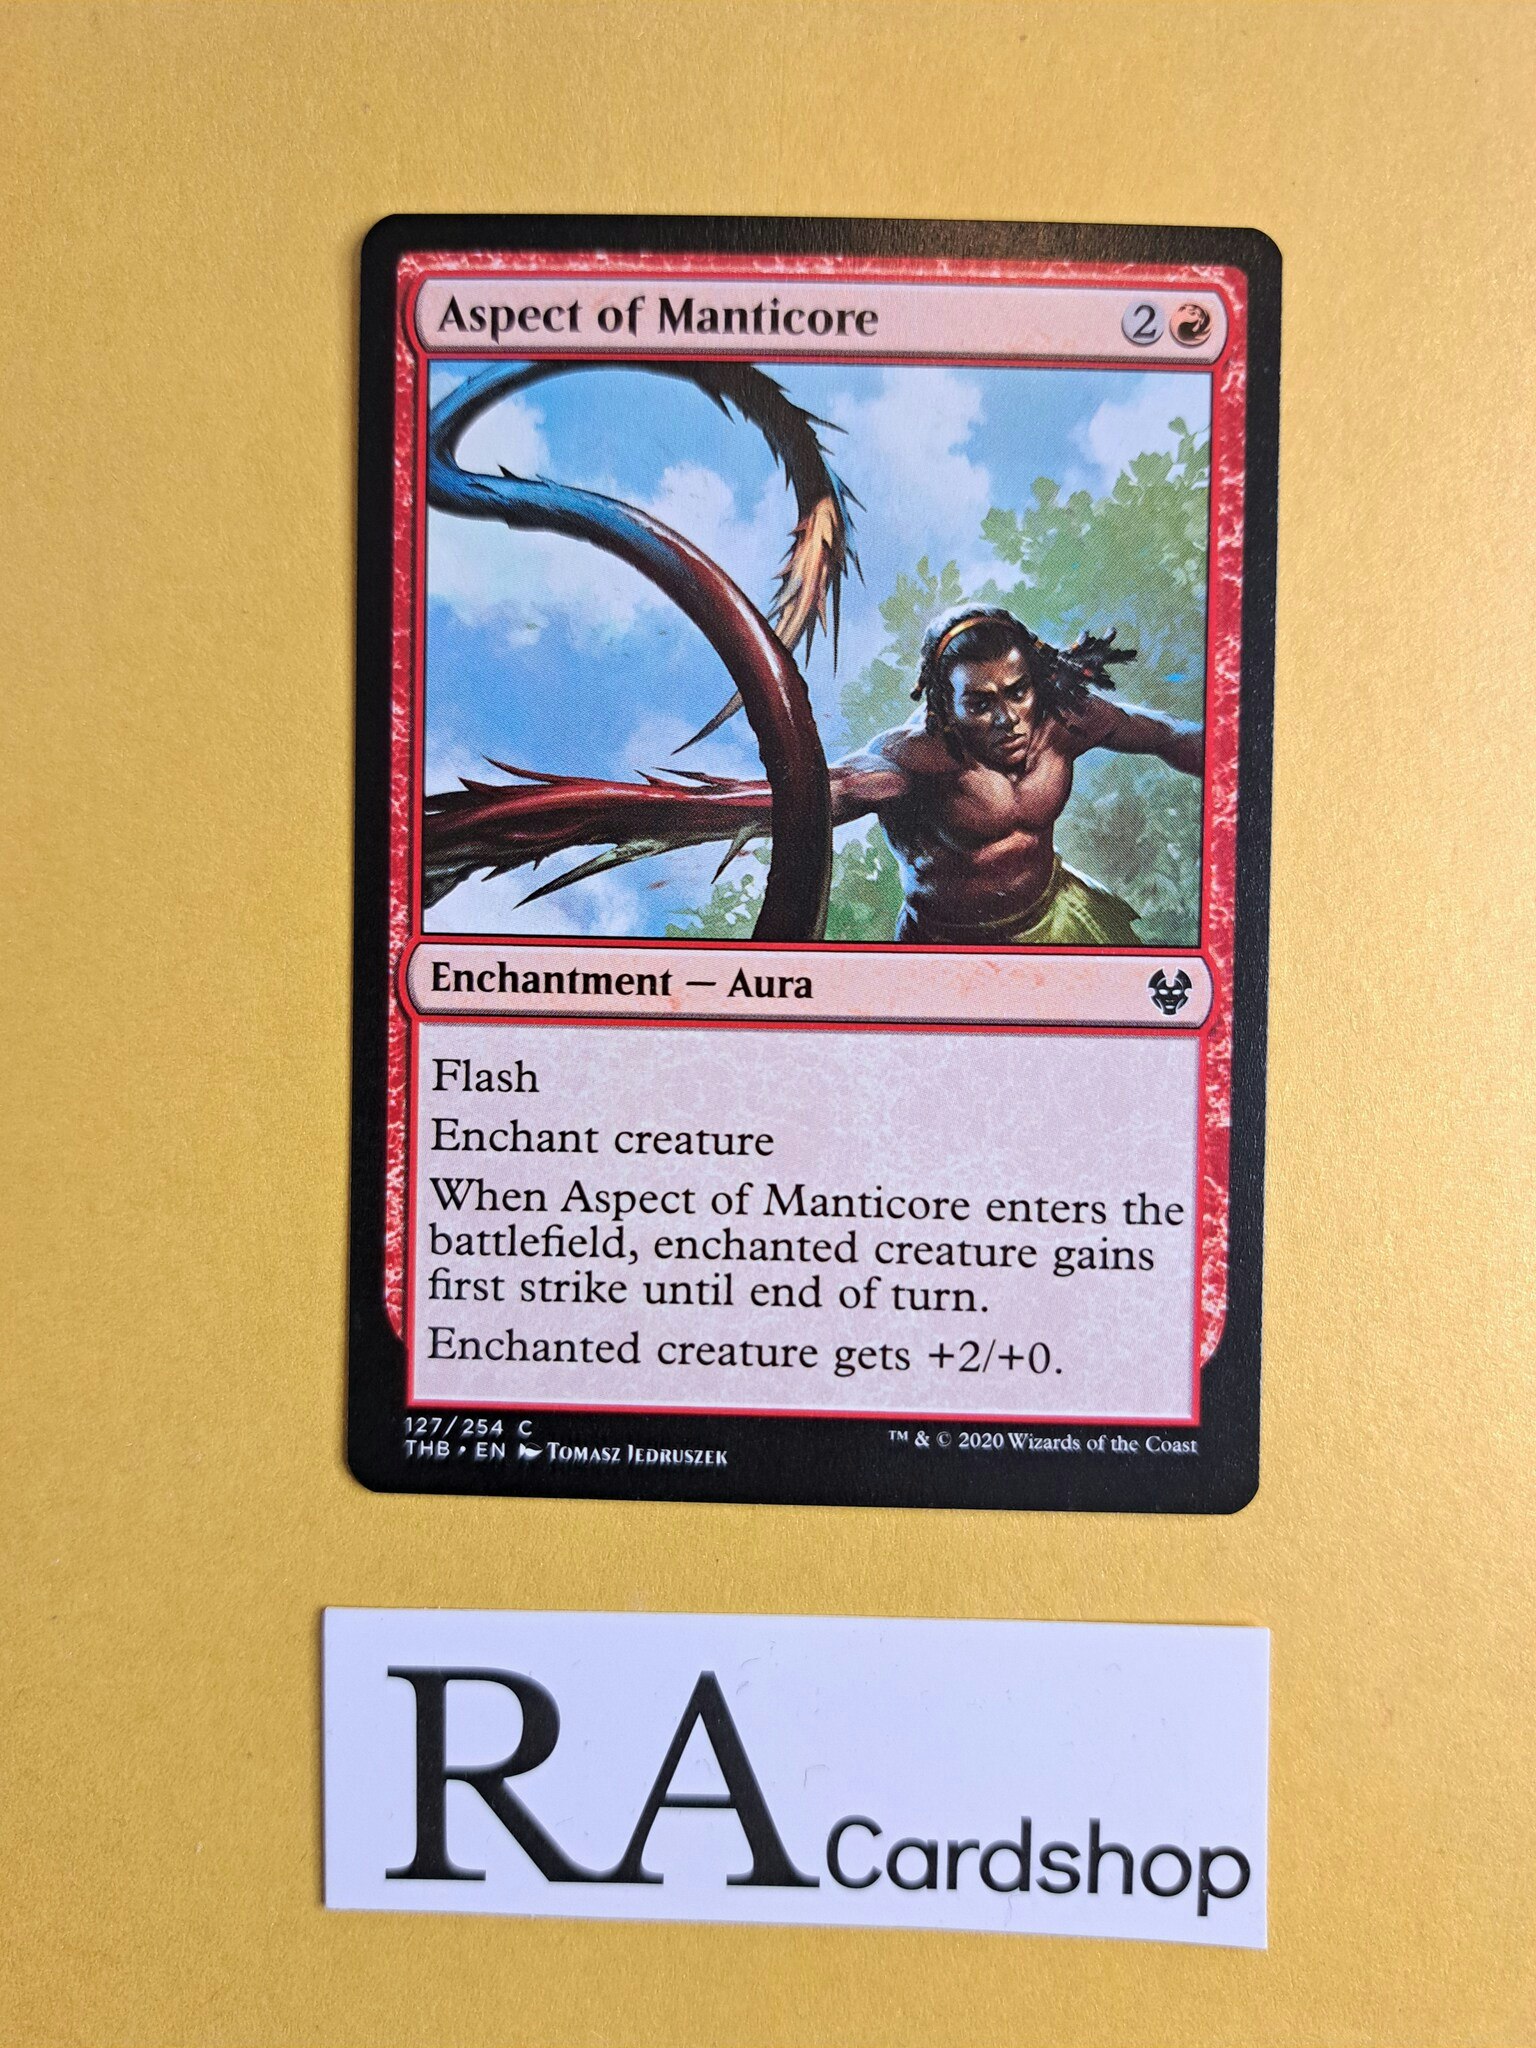 Aspect of Manticore Common 127/254 Theros Beyond Death (THB) Magic the Gathering